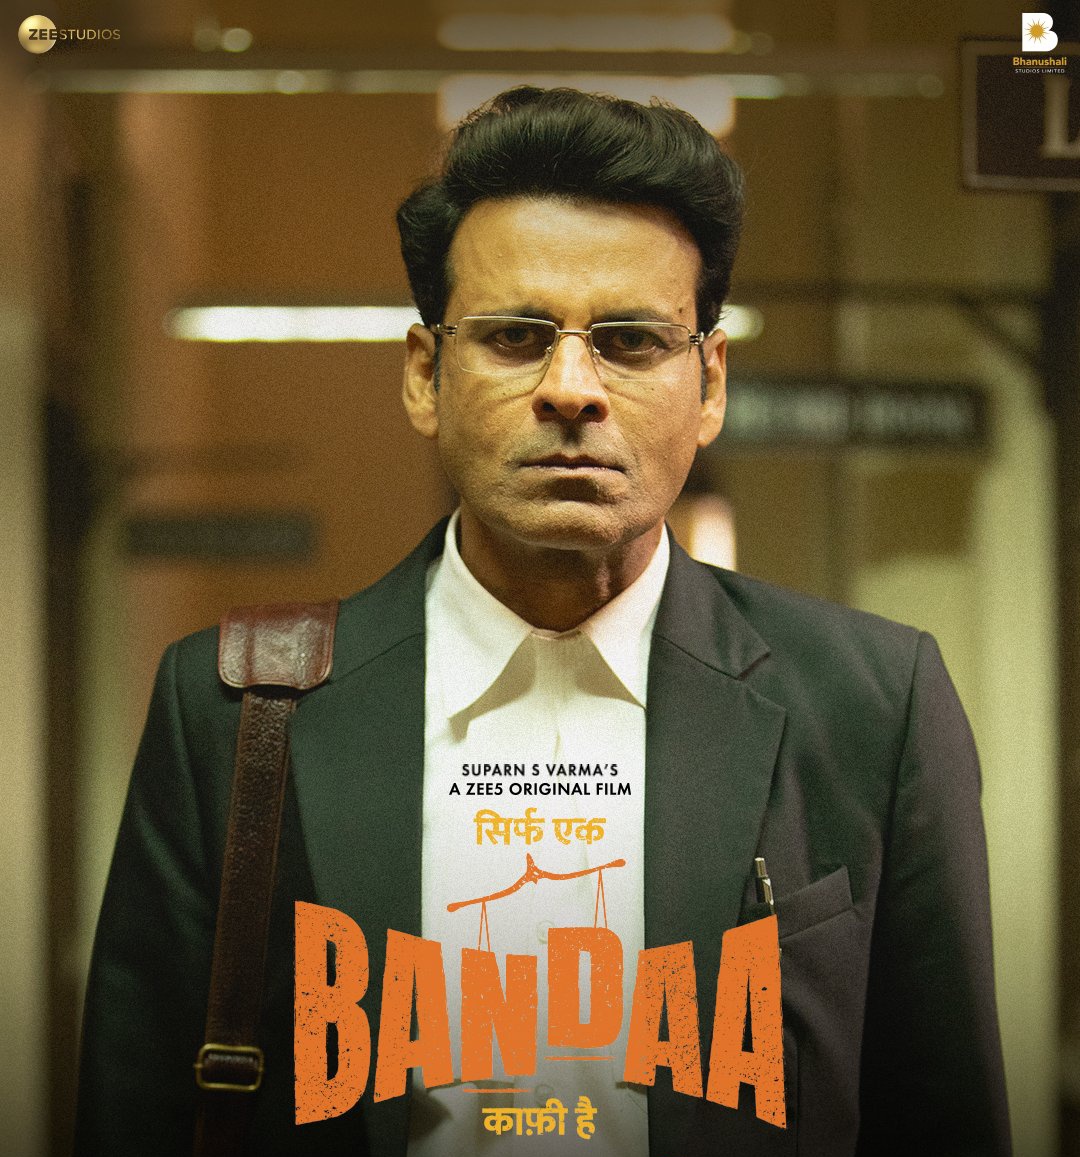 #BandaaReview 

#Bandaa is one of those rarest film, which cemented people's faith in Cinema and it's Power.
⭐⭐⭐⭐

It's a free Masterclass of one of the finest actor of this generation #ManojBajpayee. He is Phenomenal as Jodhpur Advocate 'PC Solanki'. 🙌
It's not everyday,…